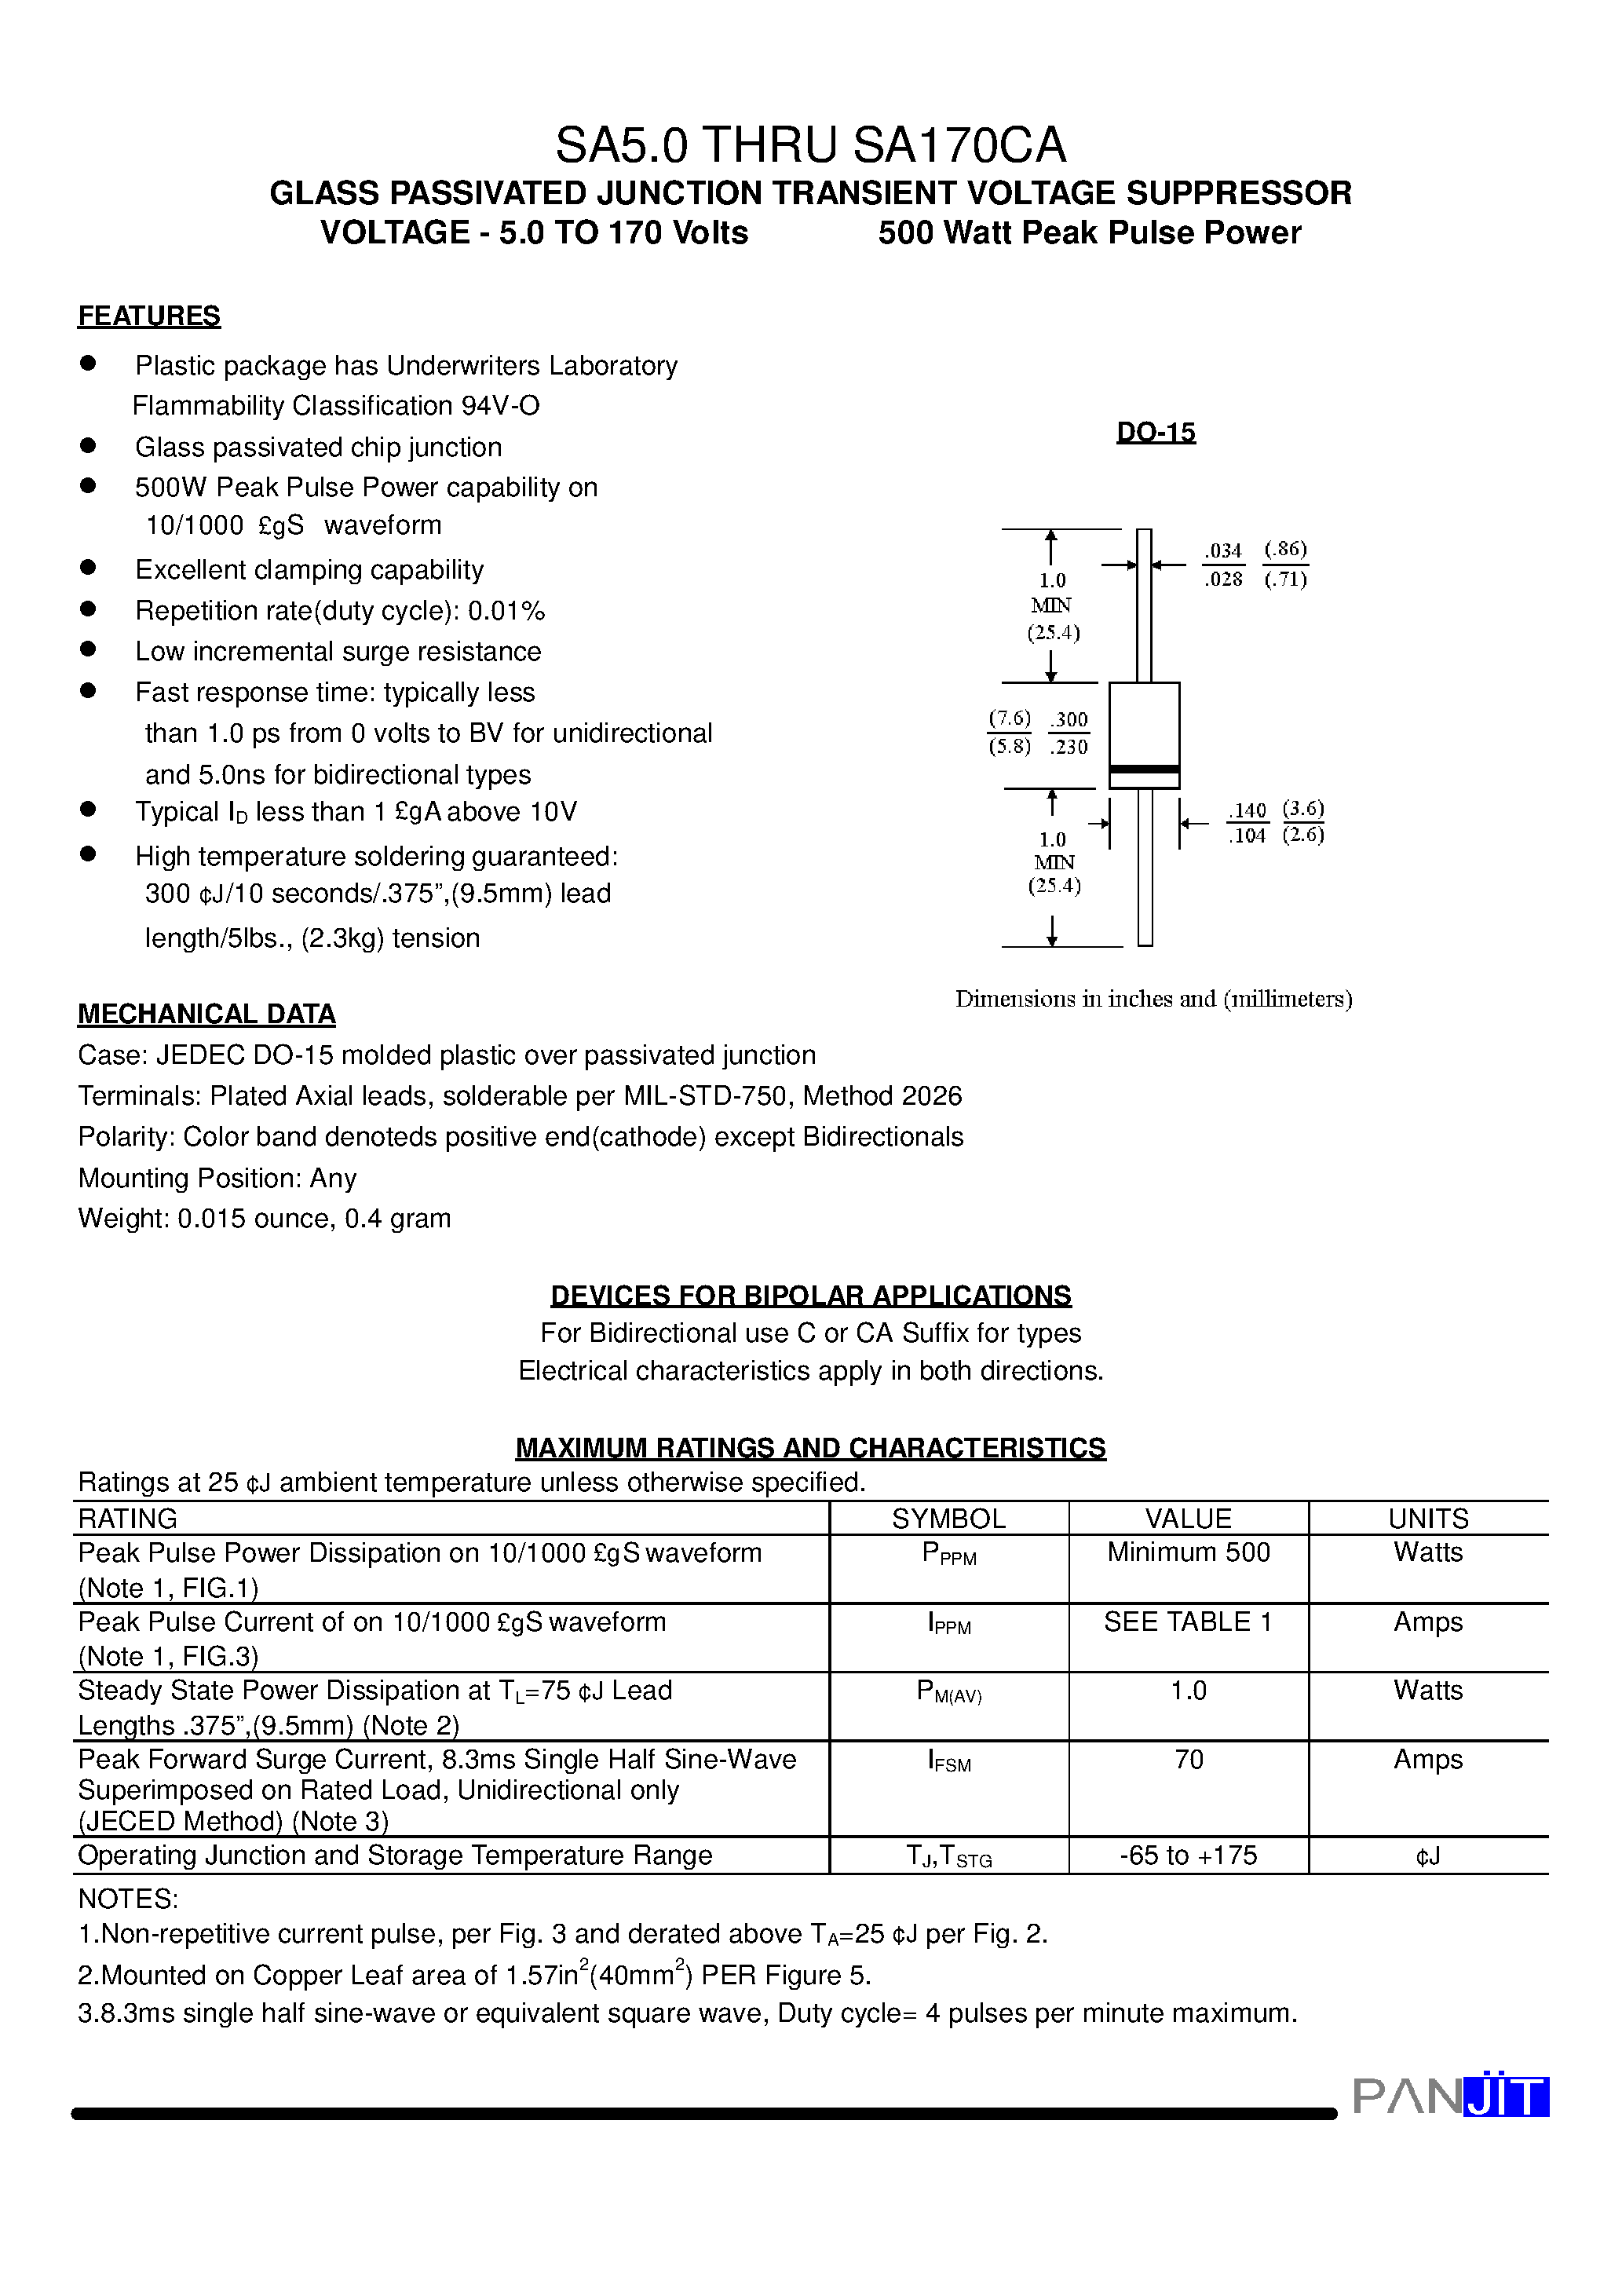 Datasheet SA36A - GLASS PASSIVATED JUNCTION TRANSIENT VOLTAGE SUPPRESSOR(VOLTAGE - 5.0 TO 170 Volts 500 Watt Peak Pulse Power) page 1